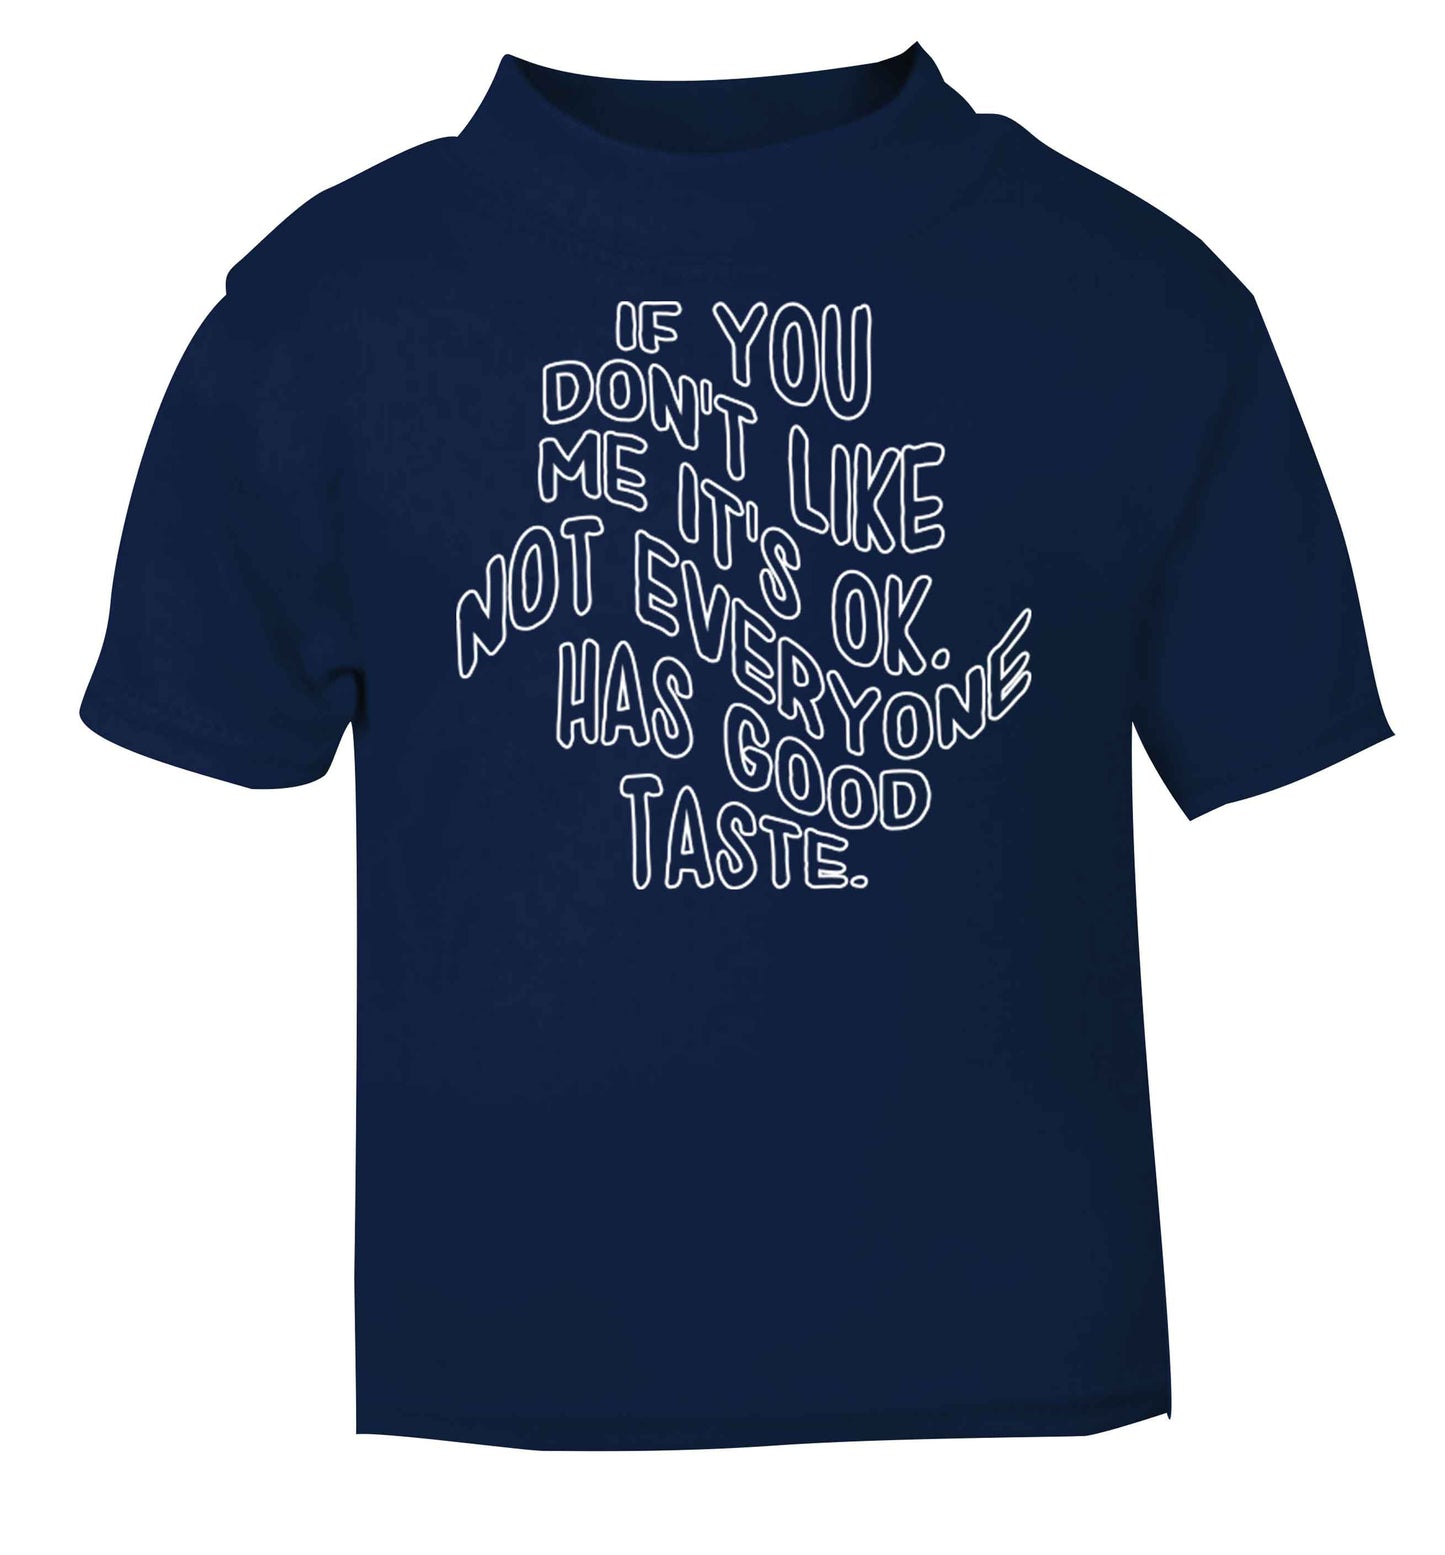 If you don't like me it's ok not everyone has good taste navy baby toddler Tshirt 2 Years